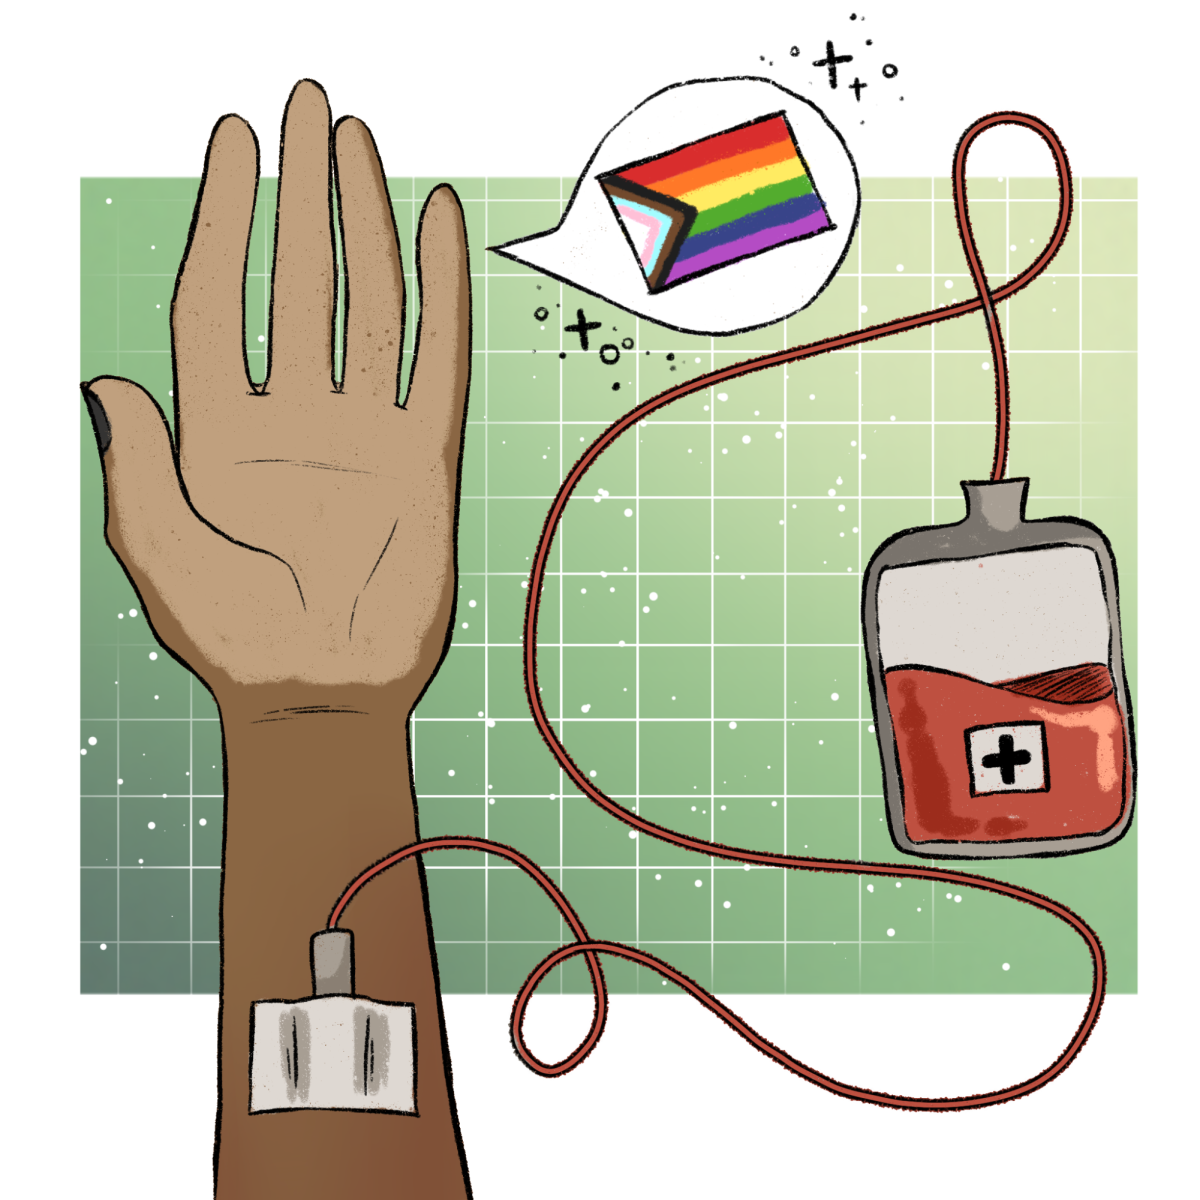 Austin blood donation center We Are Blood expands eligibility guidelines to include more LGBTQ+ donors